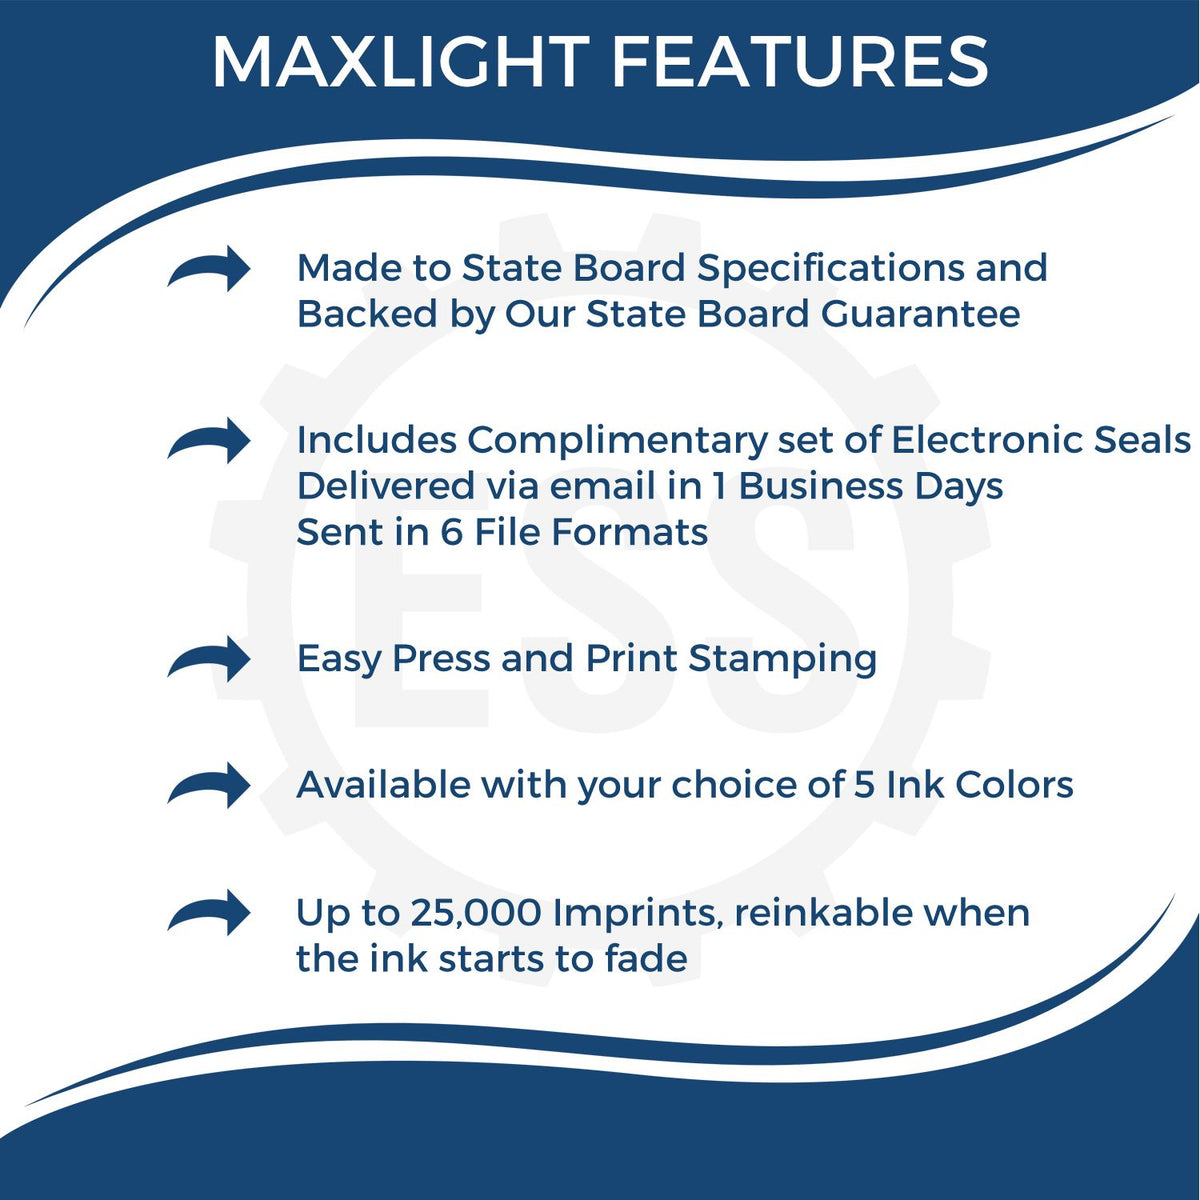 A picture of an infographic highlighting the selling points for the Premium MaxLight Pre-Inked Oklahoma Geology Stamp